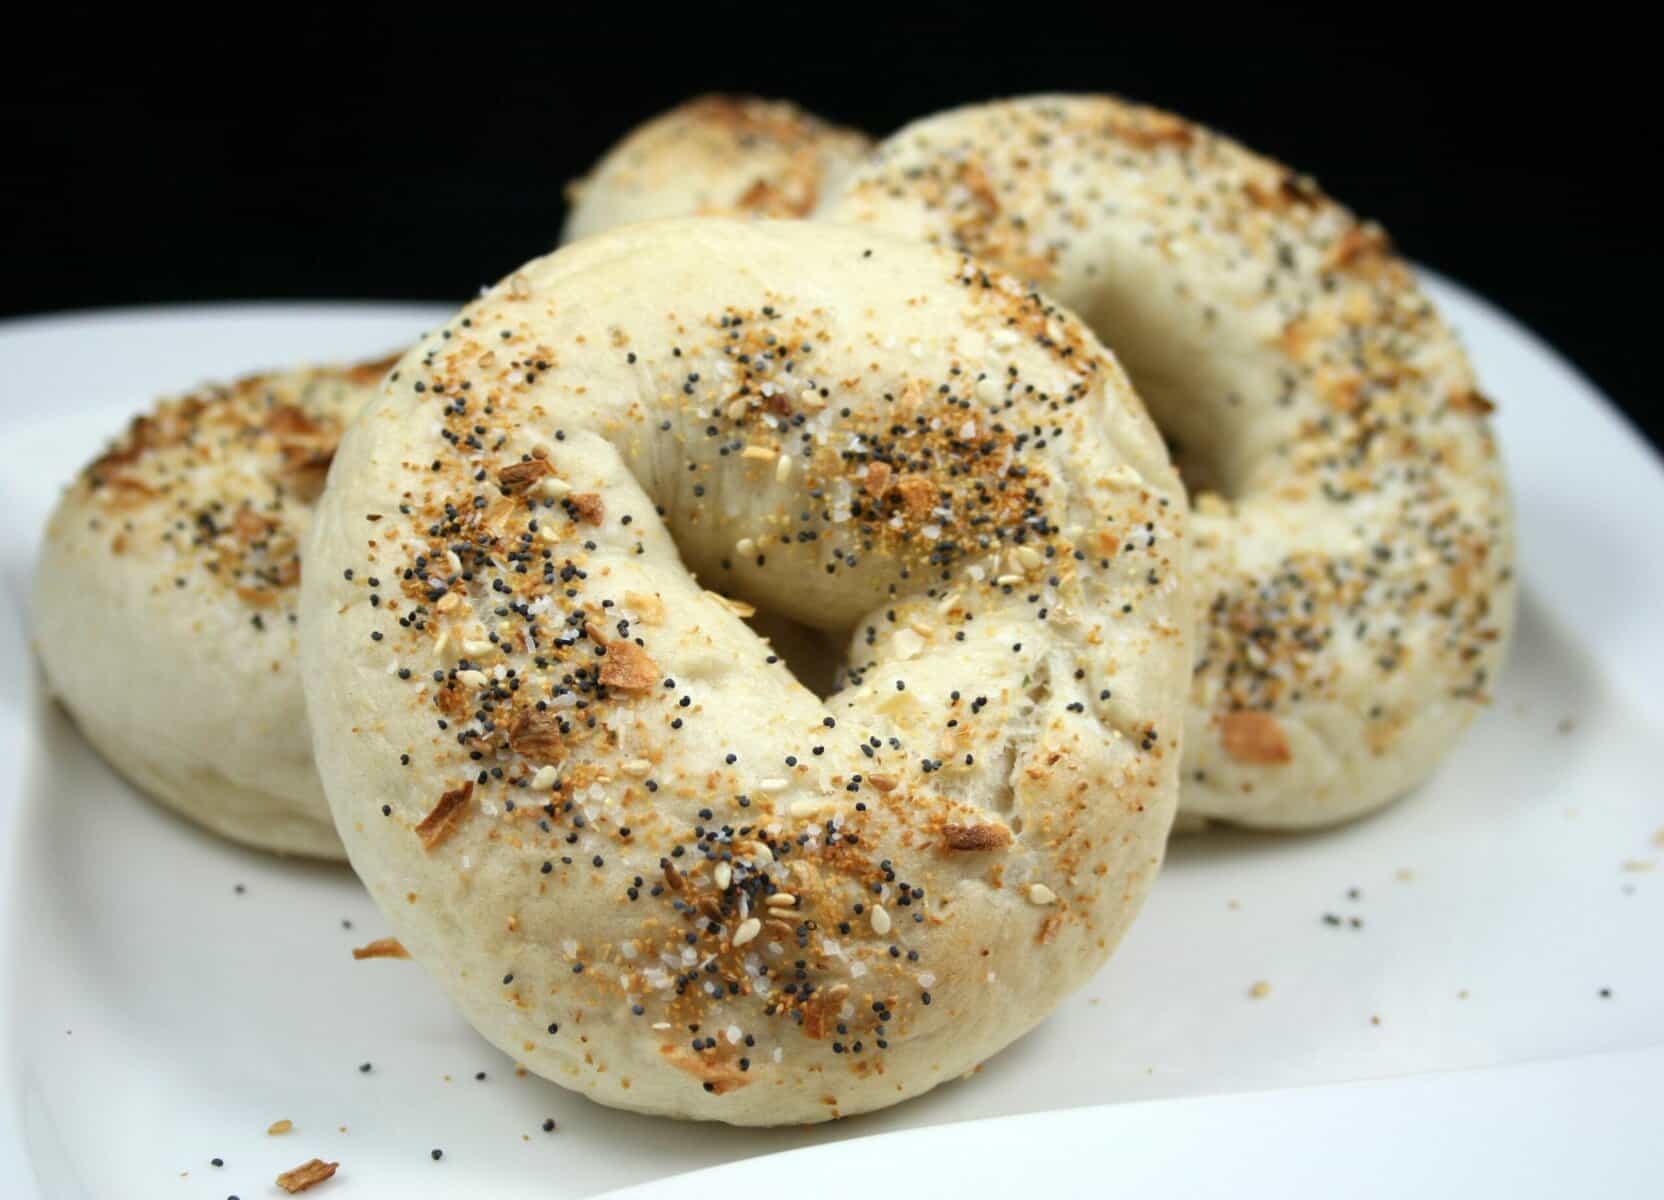  No need to go to the store for bagels when you can make them at home!